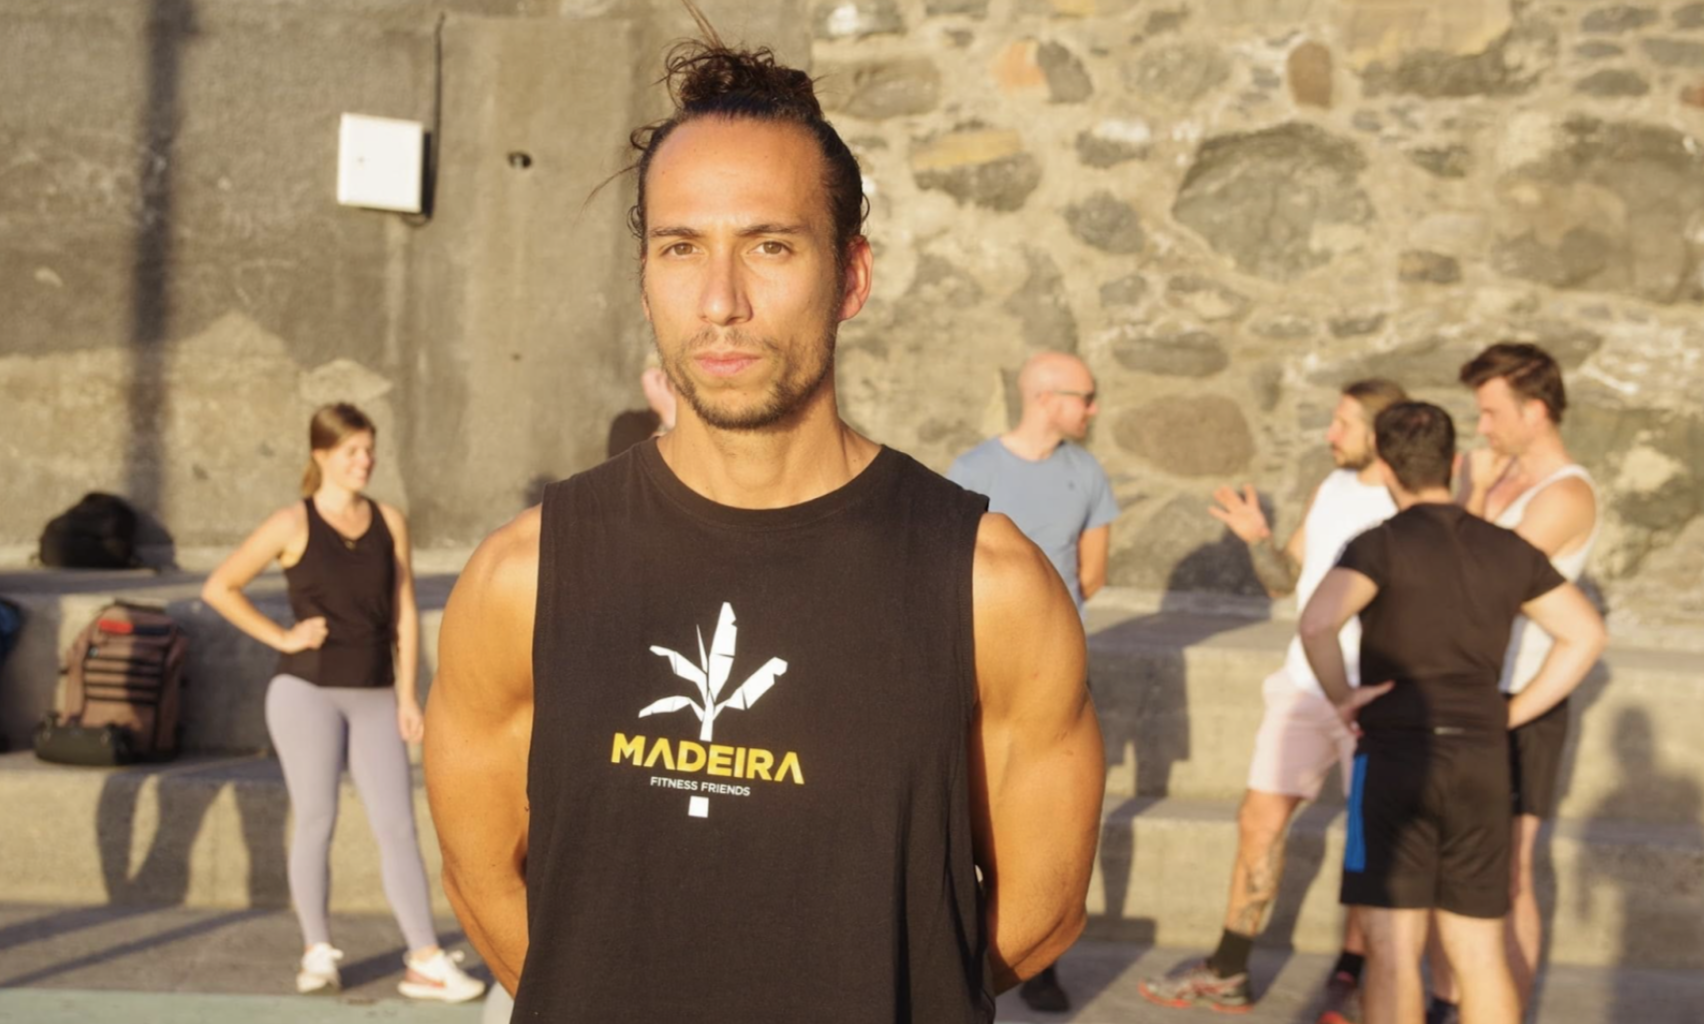 An image of Luis Calado, Madeira local and digital nomad fitness coach